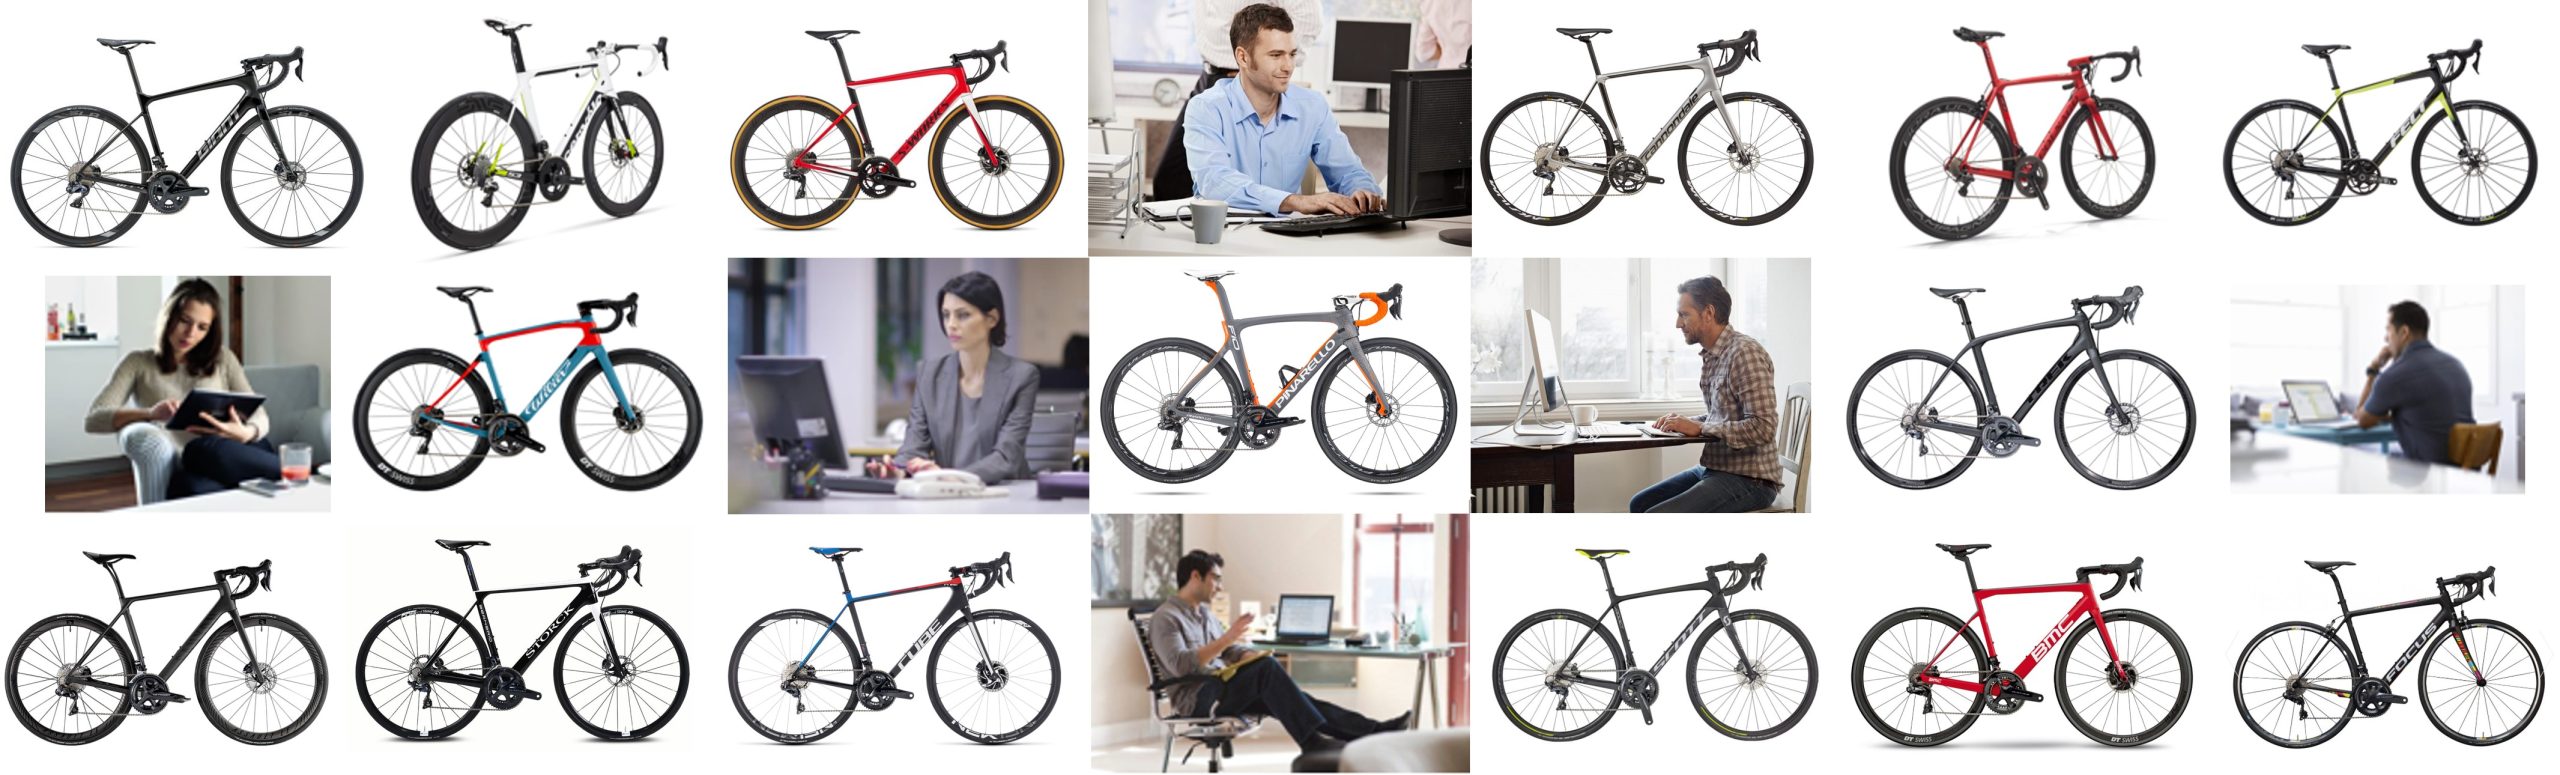 HOW AND WHERE TO BUY BIKES ONLINE